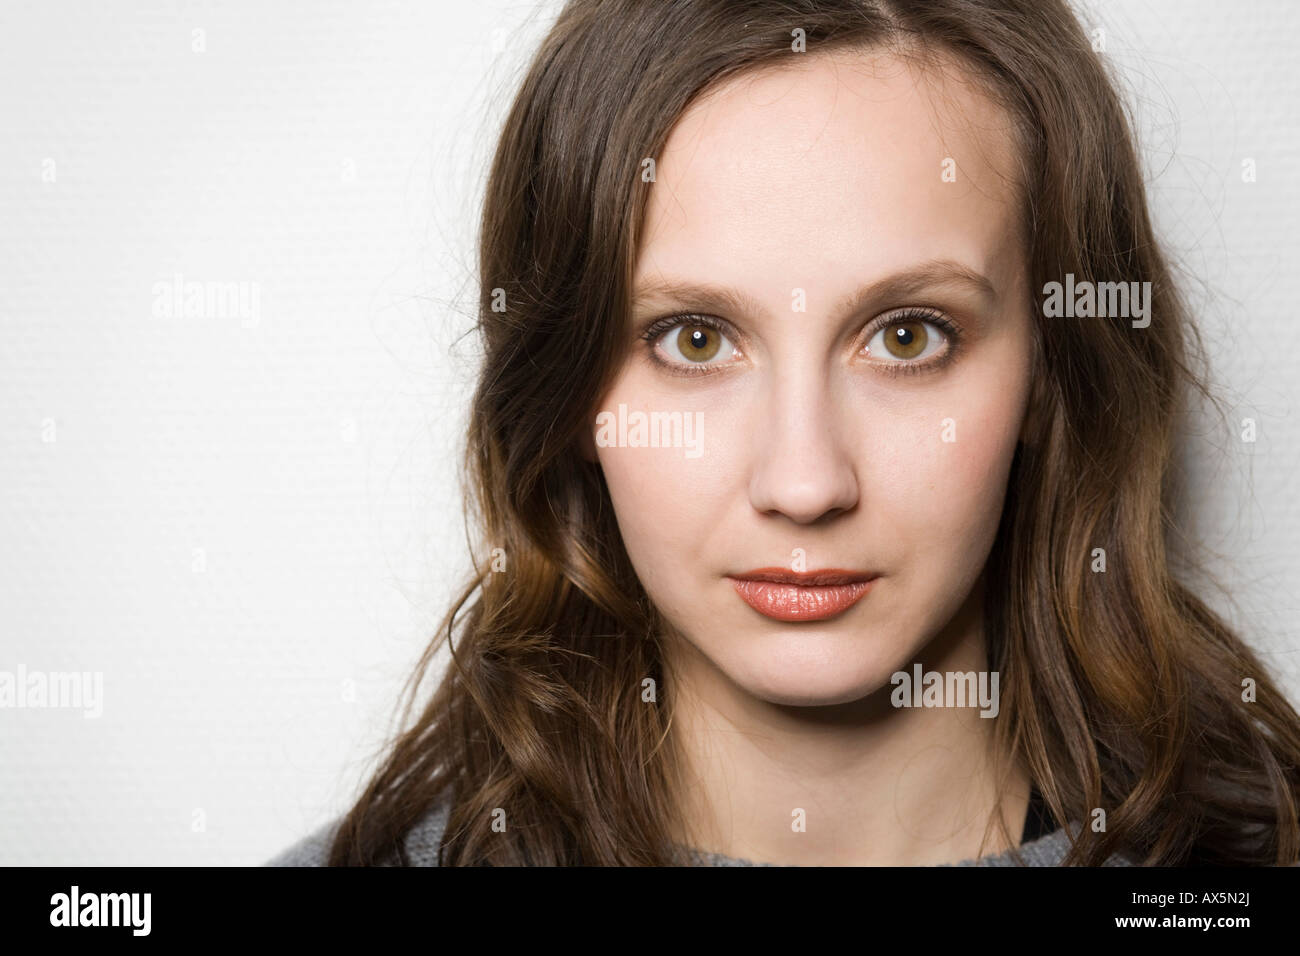 Portrait of a young woman in front of a white background Stock Photo